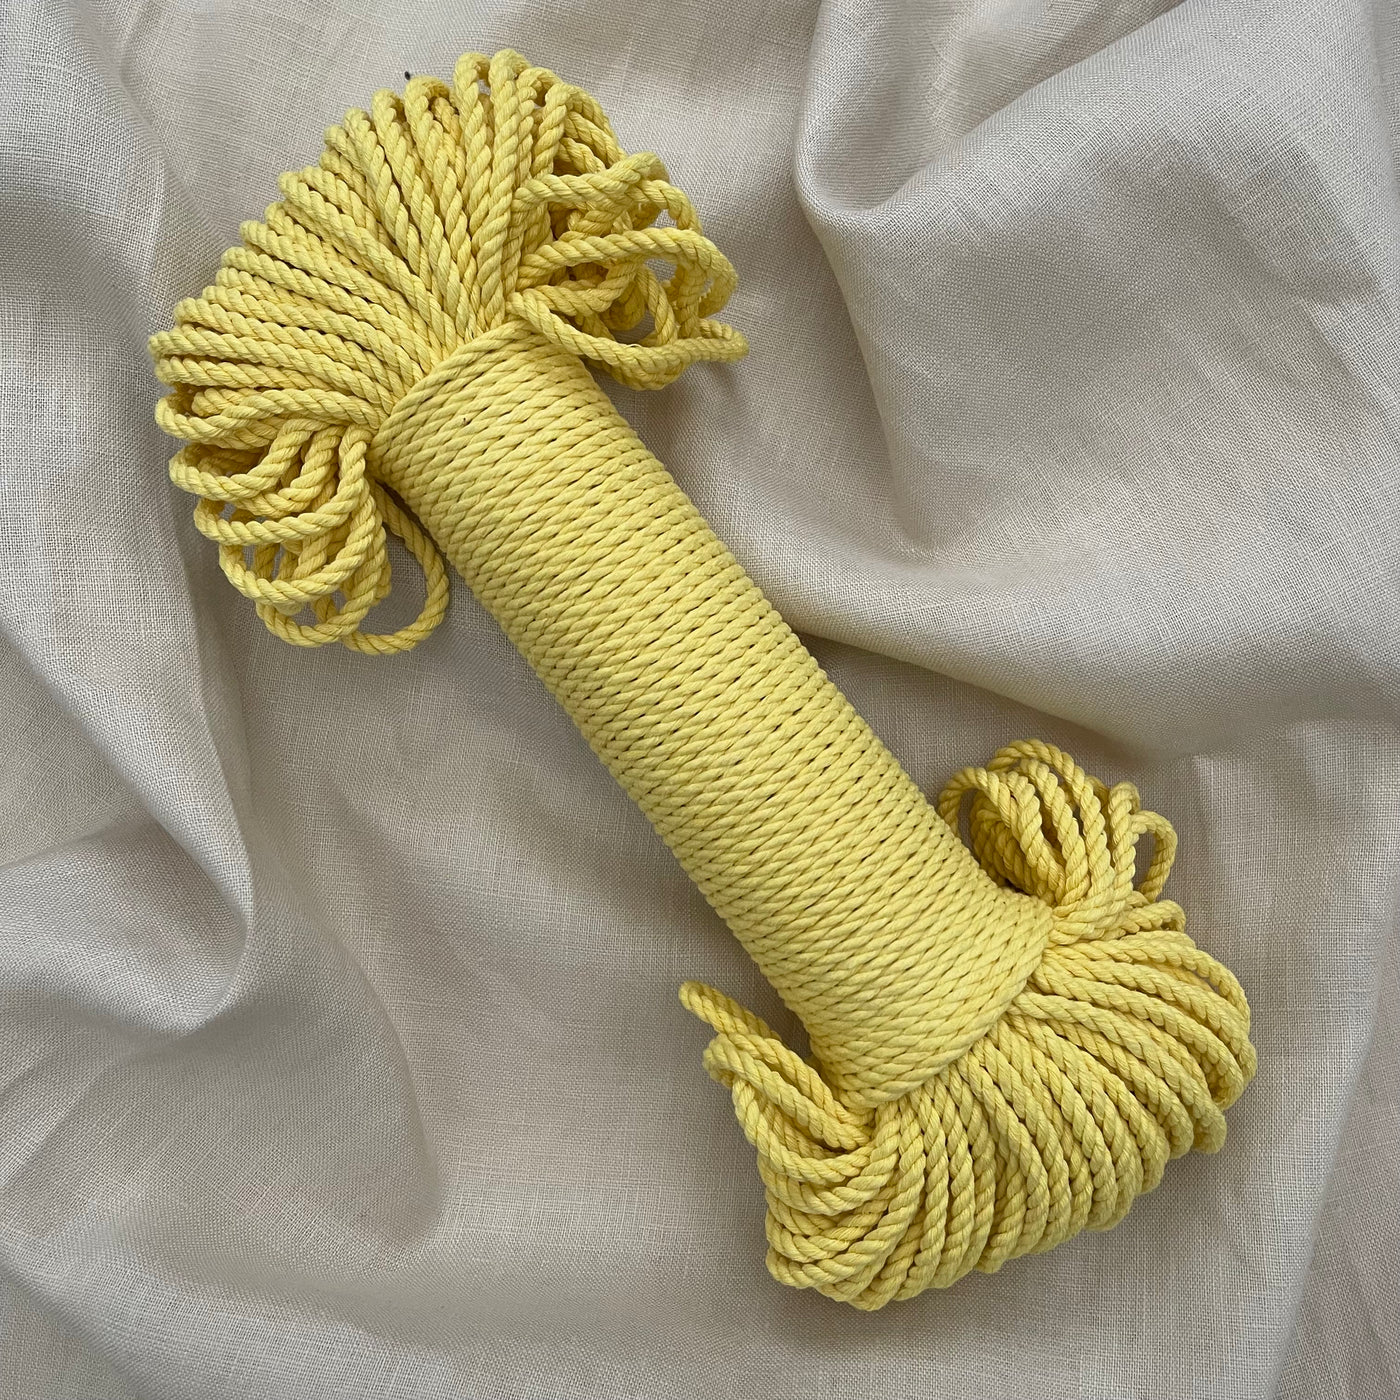 Macrame 3ply cotton rope 4mm in a classical 'Wattle' colour is a fantastic addition to your fibre collection and is perfect for macrame projects such as plant hangers or pieces that require that little bit of extra guts!